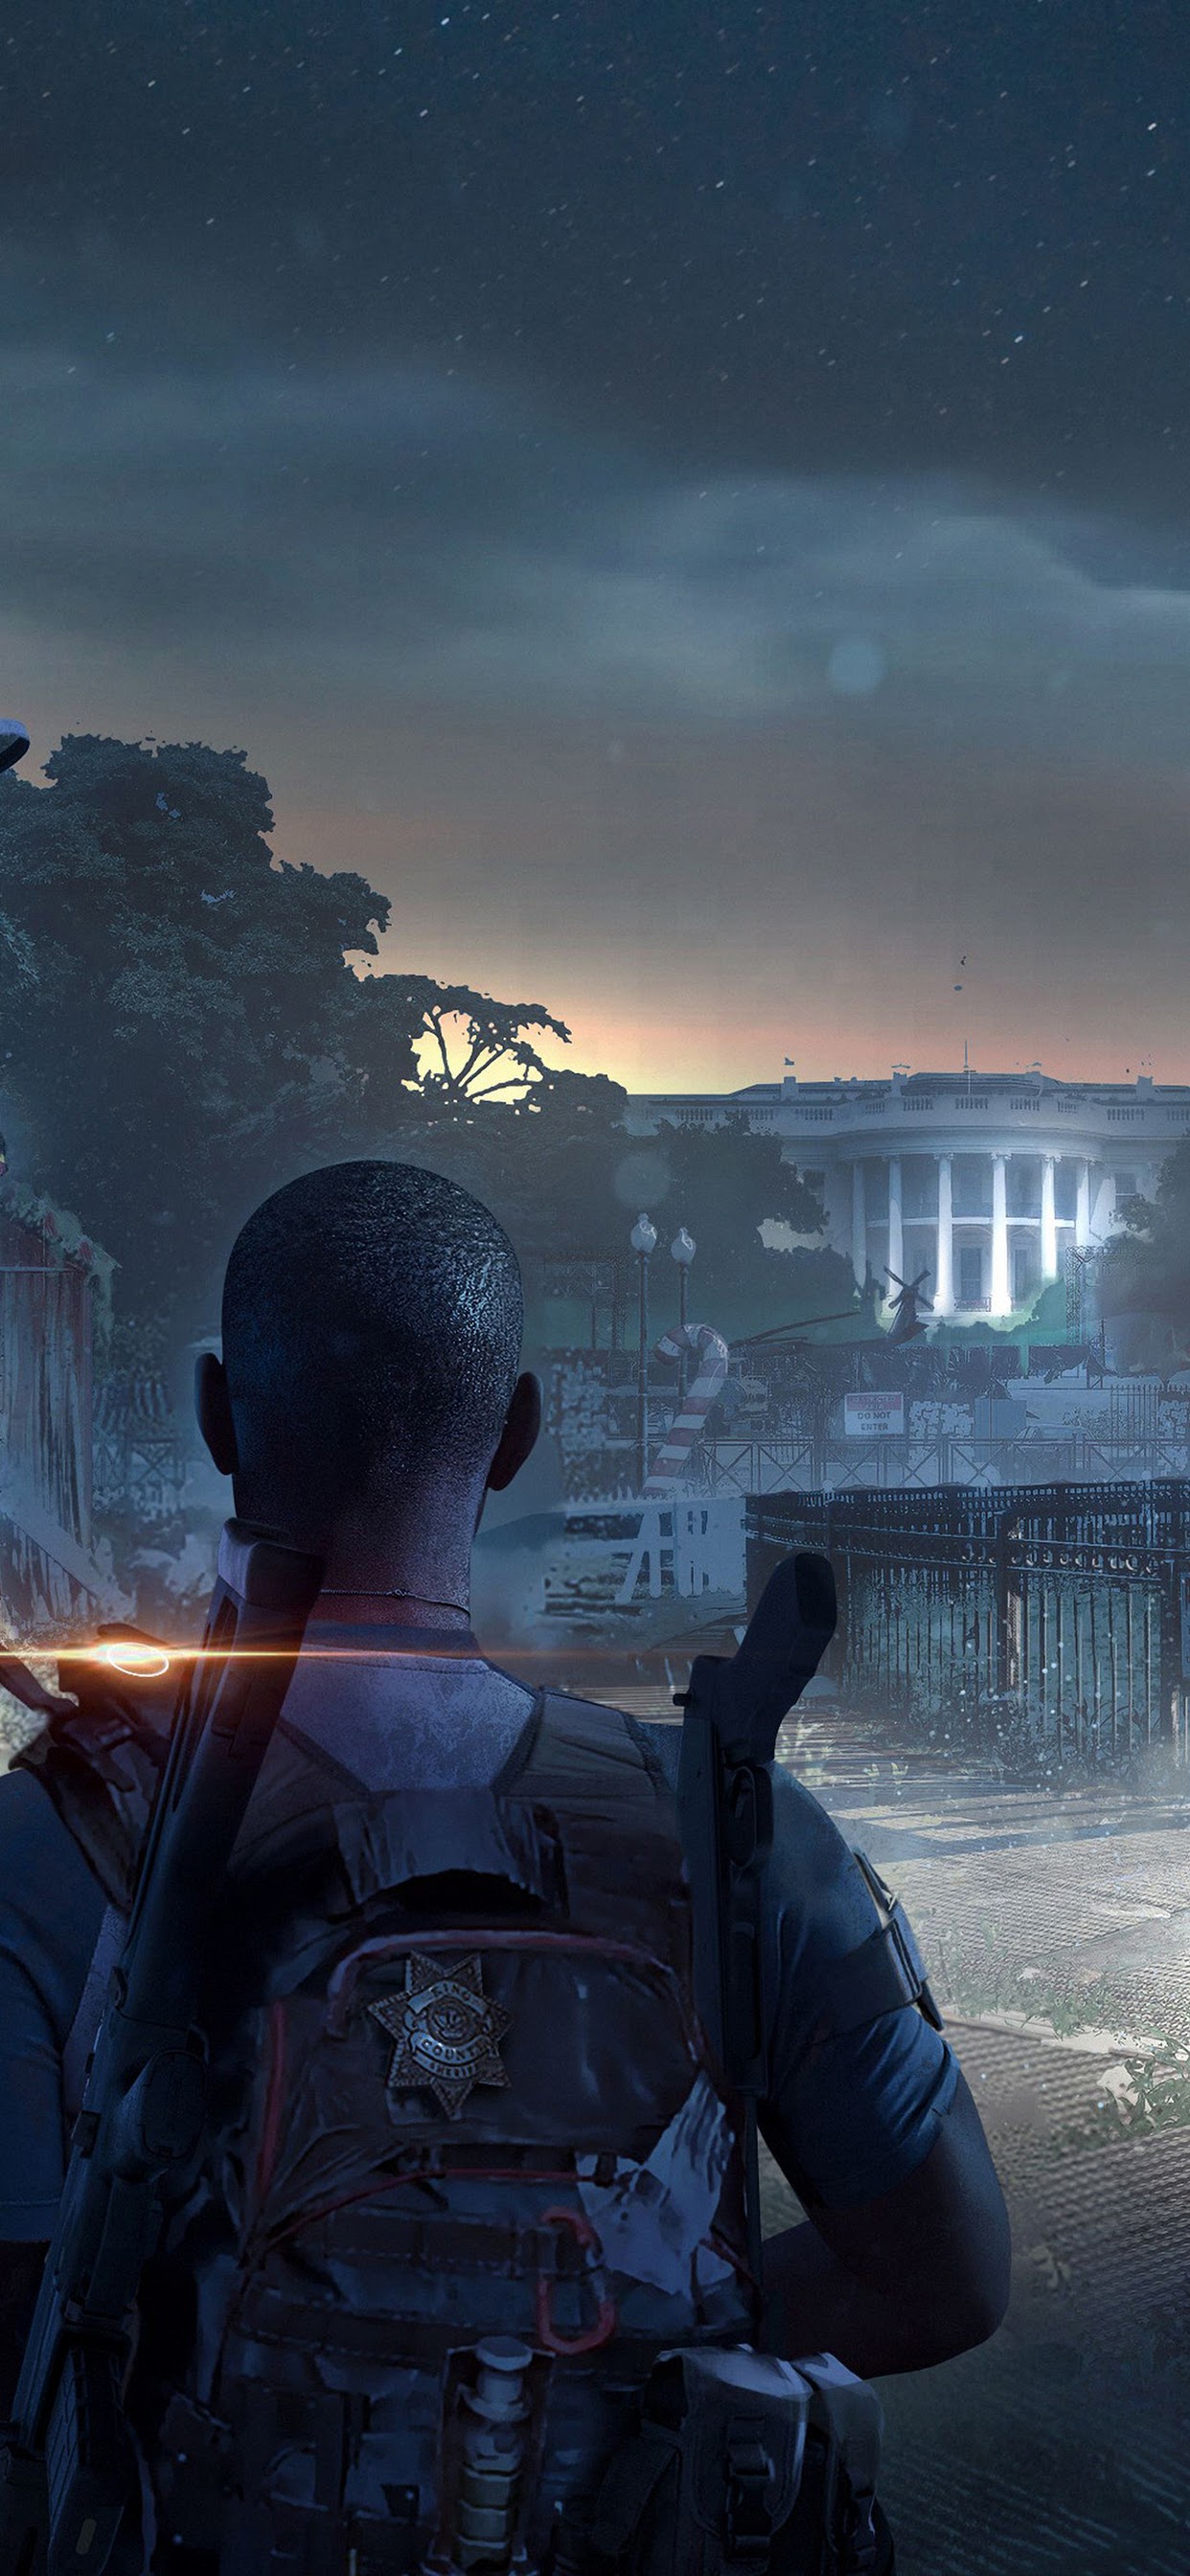 The Division 2 Agents 4k Wallpaper 2